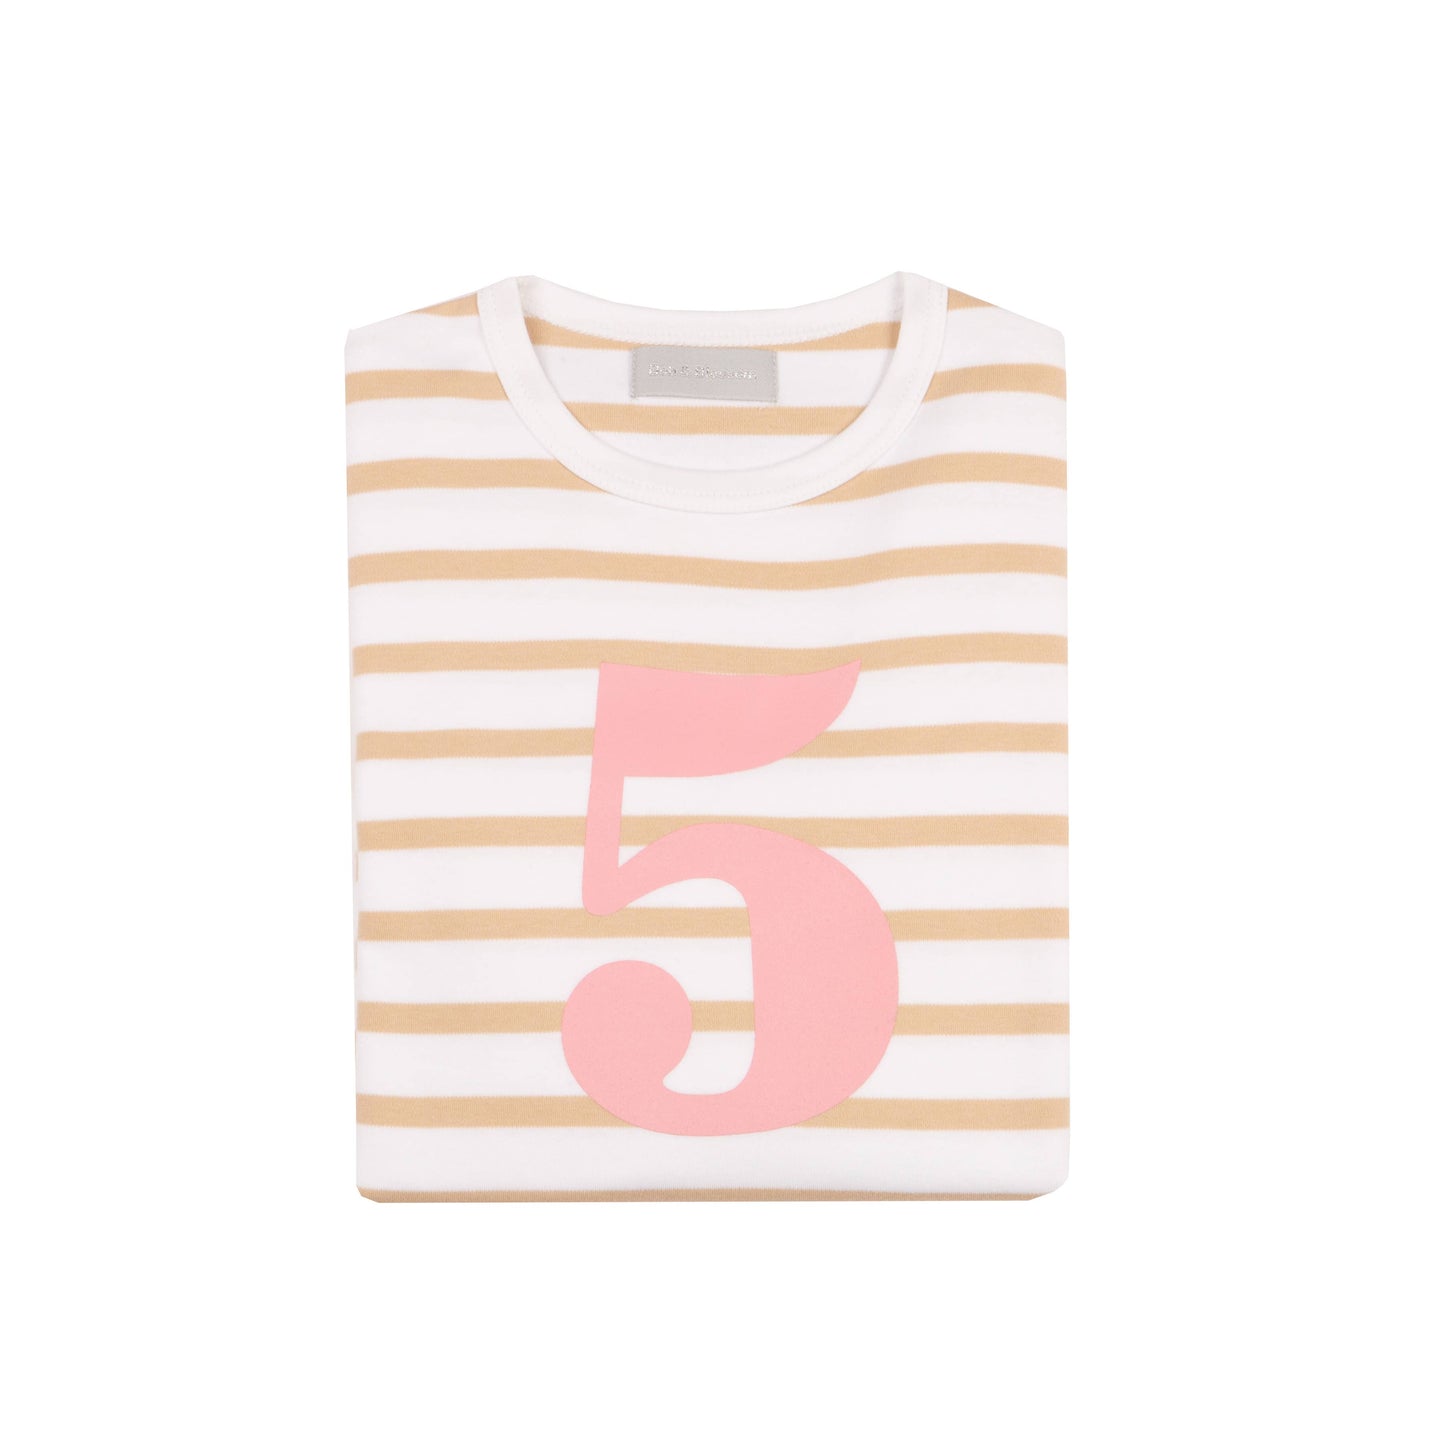 Biscuit & White Striped 5 (Pink) Shirt